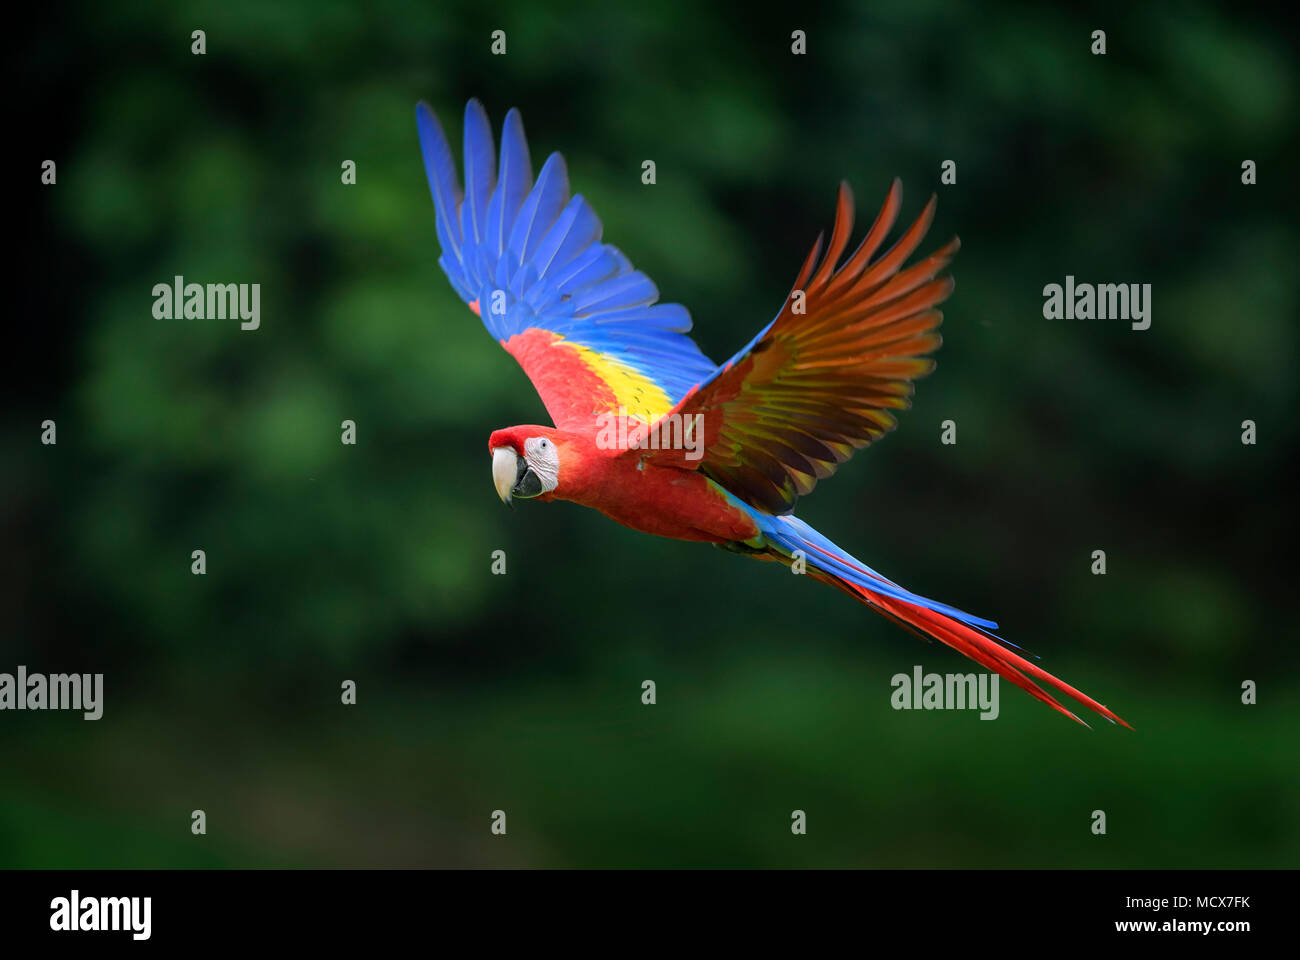 Scarlet Macaw - Ara macao, large beautiful colorful parrot from Central America forests, Costa Rica. Stock Photo